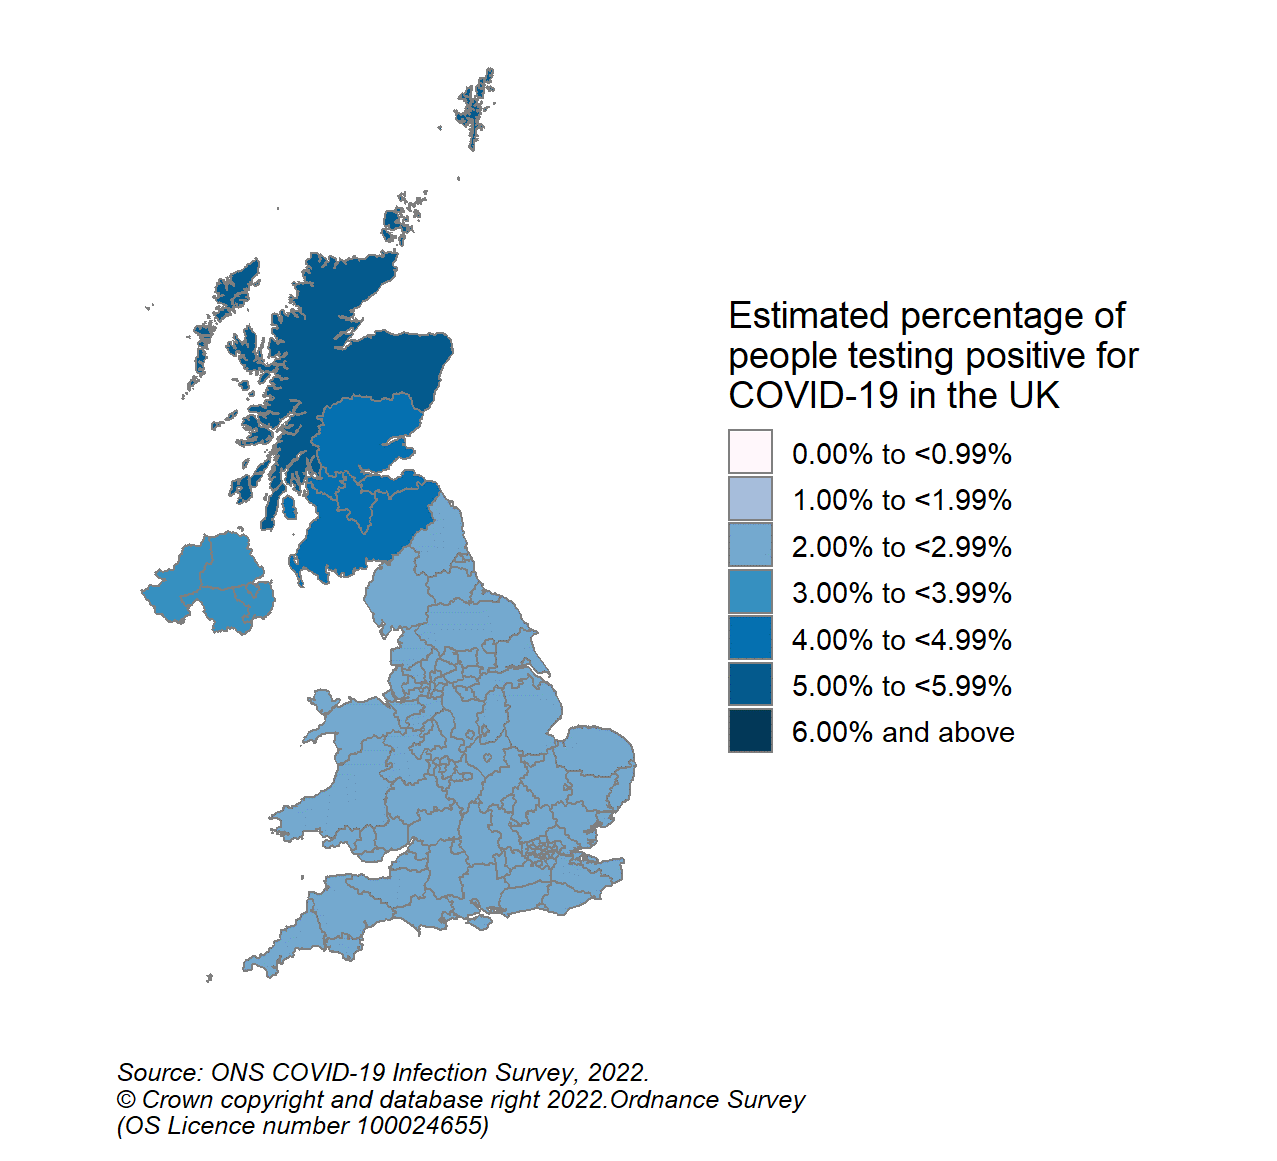 Figure 5: Modelled estimates of the percentage of the population within each CIS sub-region who would have tested positive for COVID-19, between 11 and 17 June 2022 for Scotland, and 12 and 18 June for England, Wales and Northern Ireland   A colour coded map of the UK showing modelled estimates of the percentage of people living in private households within each COVID-19 Infection Survey sub-region who would have tested positive for COVID-19 in the week 11 to 17 June 2022 for Scotland, and 12 to 18 June 2022 for England, Wales and Northern Ireland.  In Scotland, sub-regions are comprised of Health Boards. Sub-region 123 contains NHS Grampian, NHS Highland, NHS Orkney, NHS Shetland and NHS Western Isles, sub-region 124 contains NHS Fife, NHS Forth Valley and NHS Tayside, sub-region 125 contains NHS Greater Glasgow & Clyde, sub-region 126 contains NHS Lothian, sub-region 127 contains NHS Lanarkshire, and sub-region 128 contains NHS Ayrshire & Arran, NHS Borders and NHS Dumfries & Galloway.  The map ranges from light blue for 2.00% to 2.99%, blue for 3.00% to 3.99%, dark blue for 4.00% to 4.99 and very dark blue for 5.00% to 5.99% estimated positivity. Scotland CIS sub-regions are marked with dark blue (4.00% to 4.99%) and very dark blue (5.00% to 5.99%).